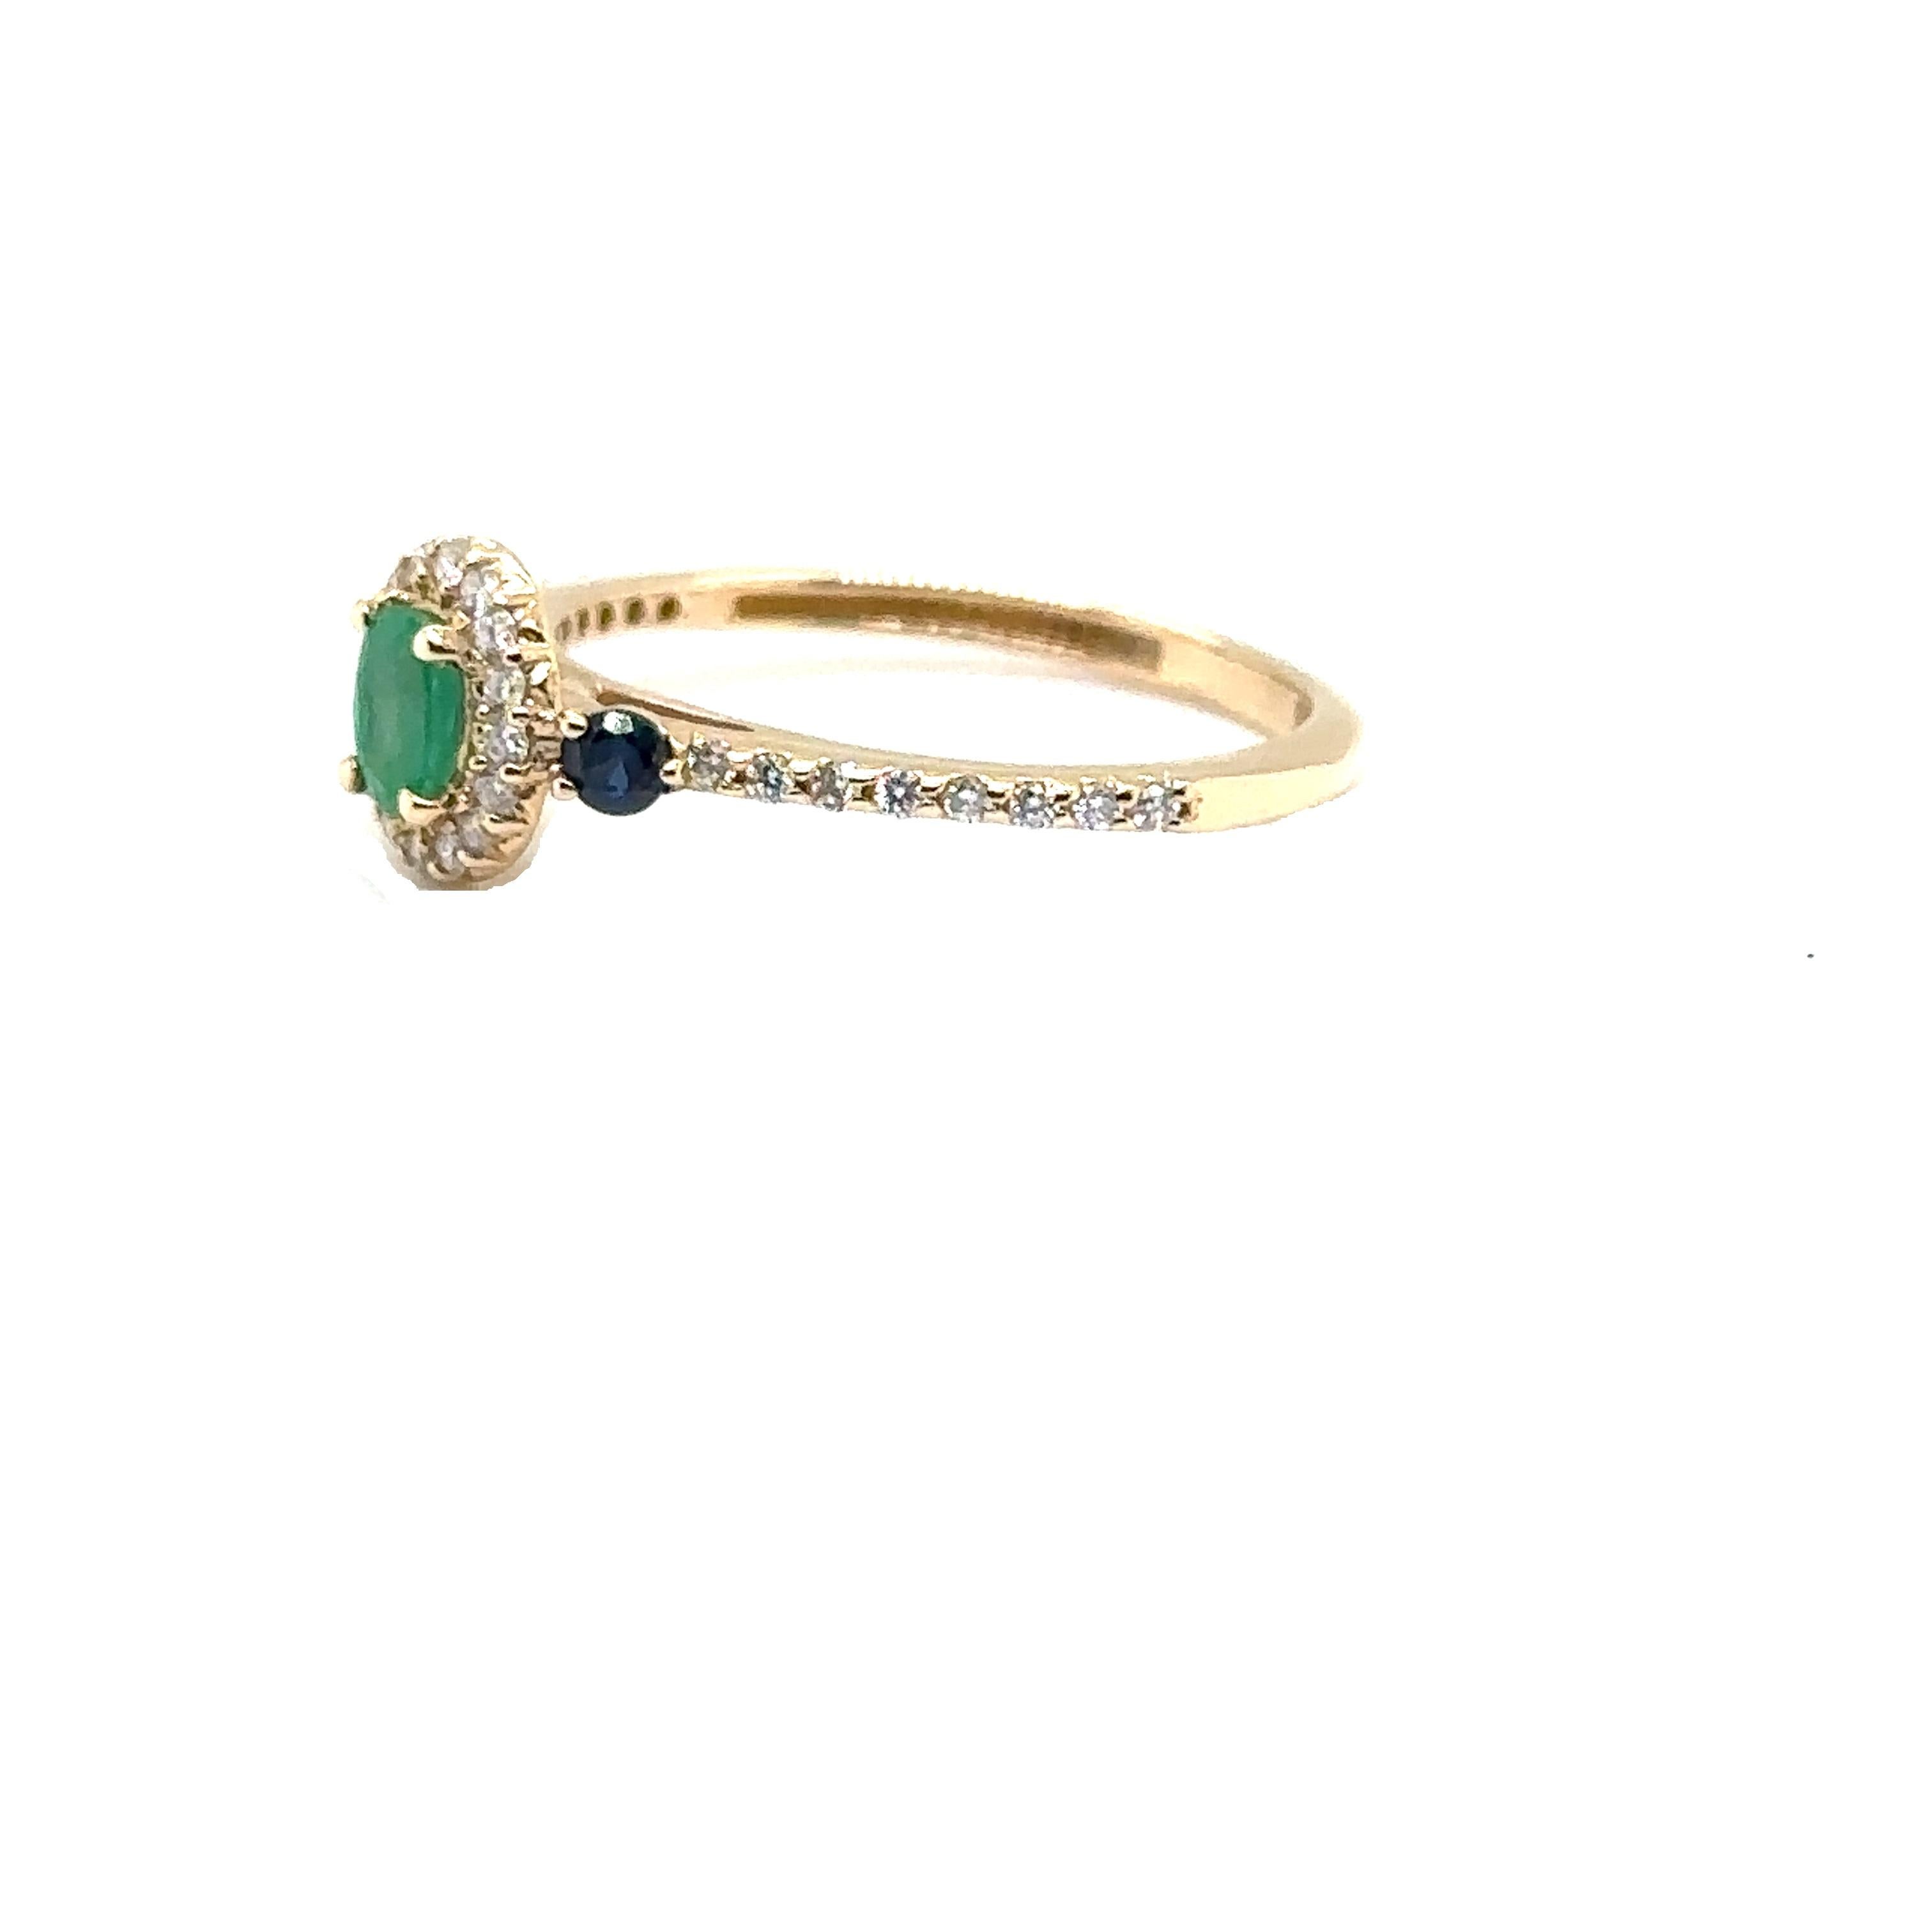 JAS-20-2134 - 14K YELLOW GOLD EMERALD RING with SAPPHIRES & DIAMONDS  For Sale 2